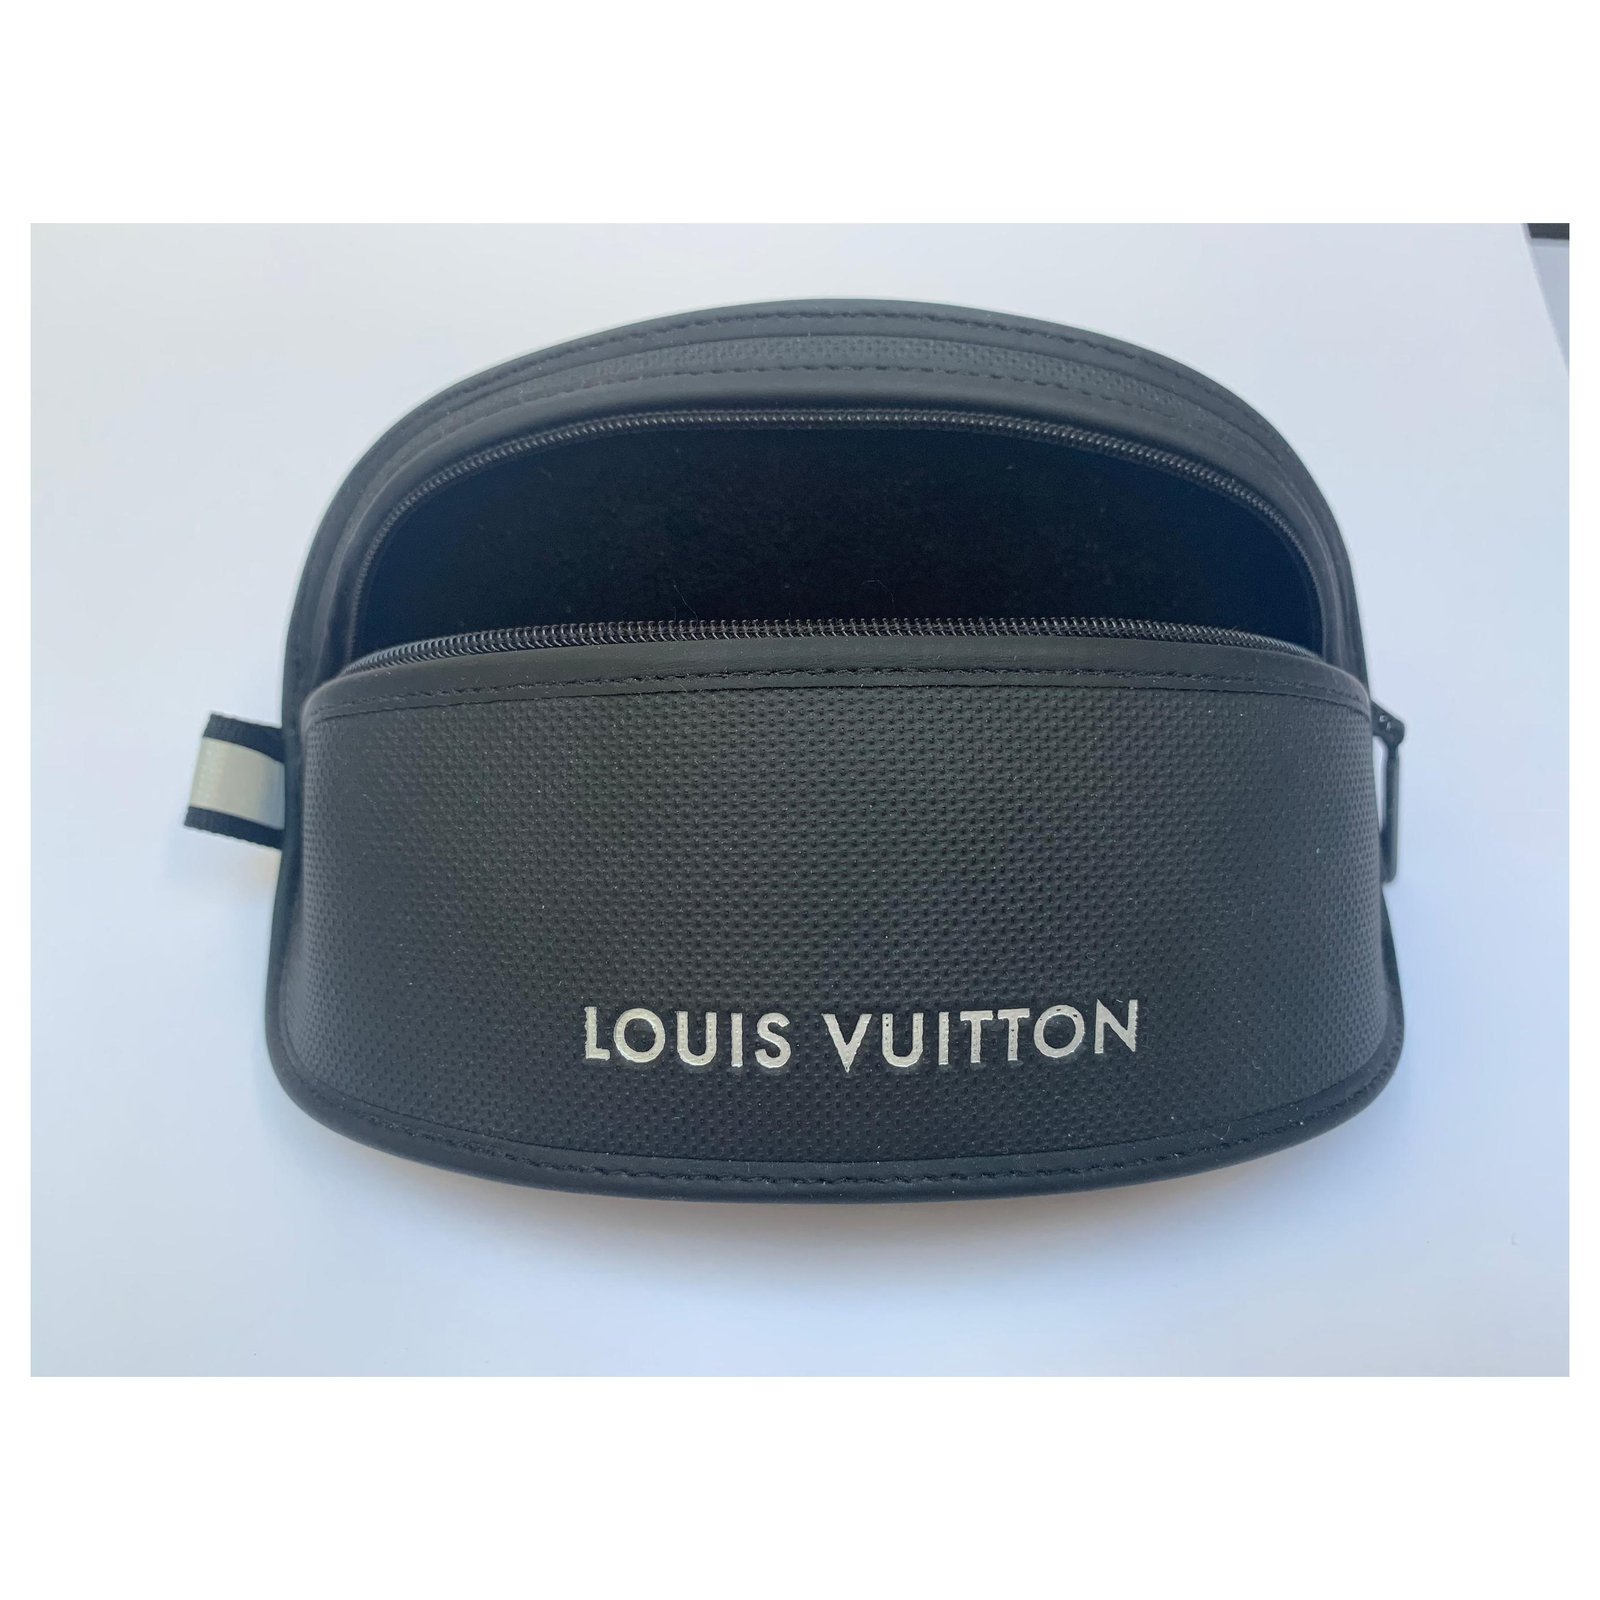 Louis Vuitton 4Motion Limited Edition Sunglasses! SOLD OUT WORLD WIDE !